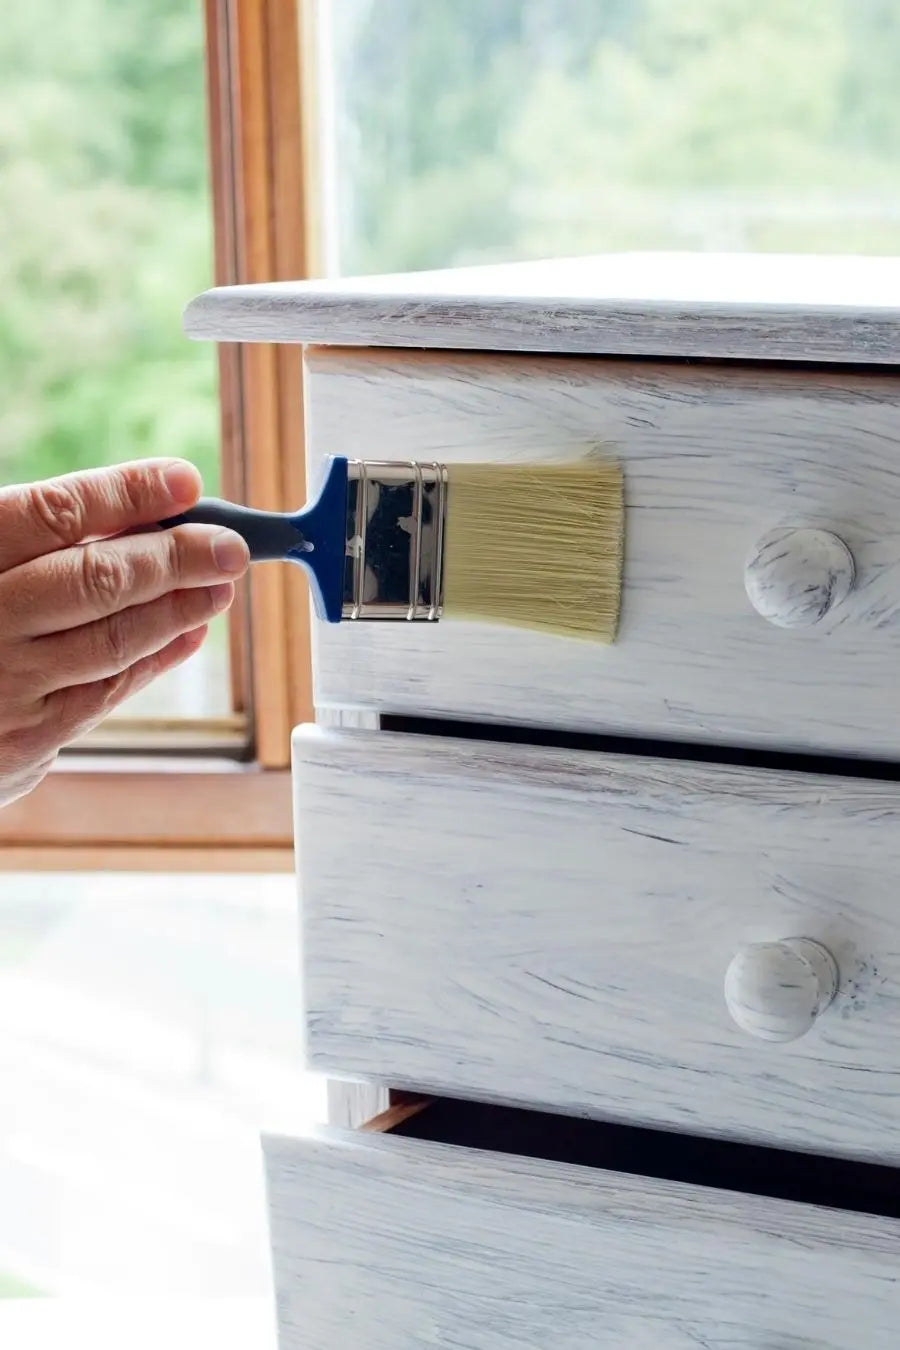 How To Paint White Furniture 